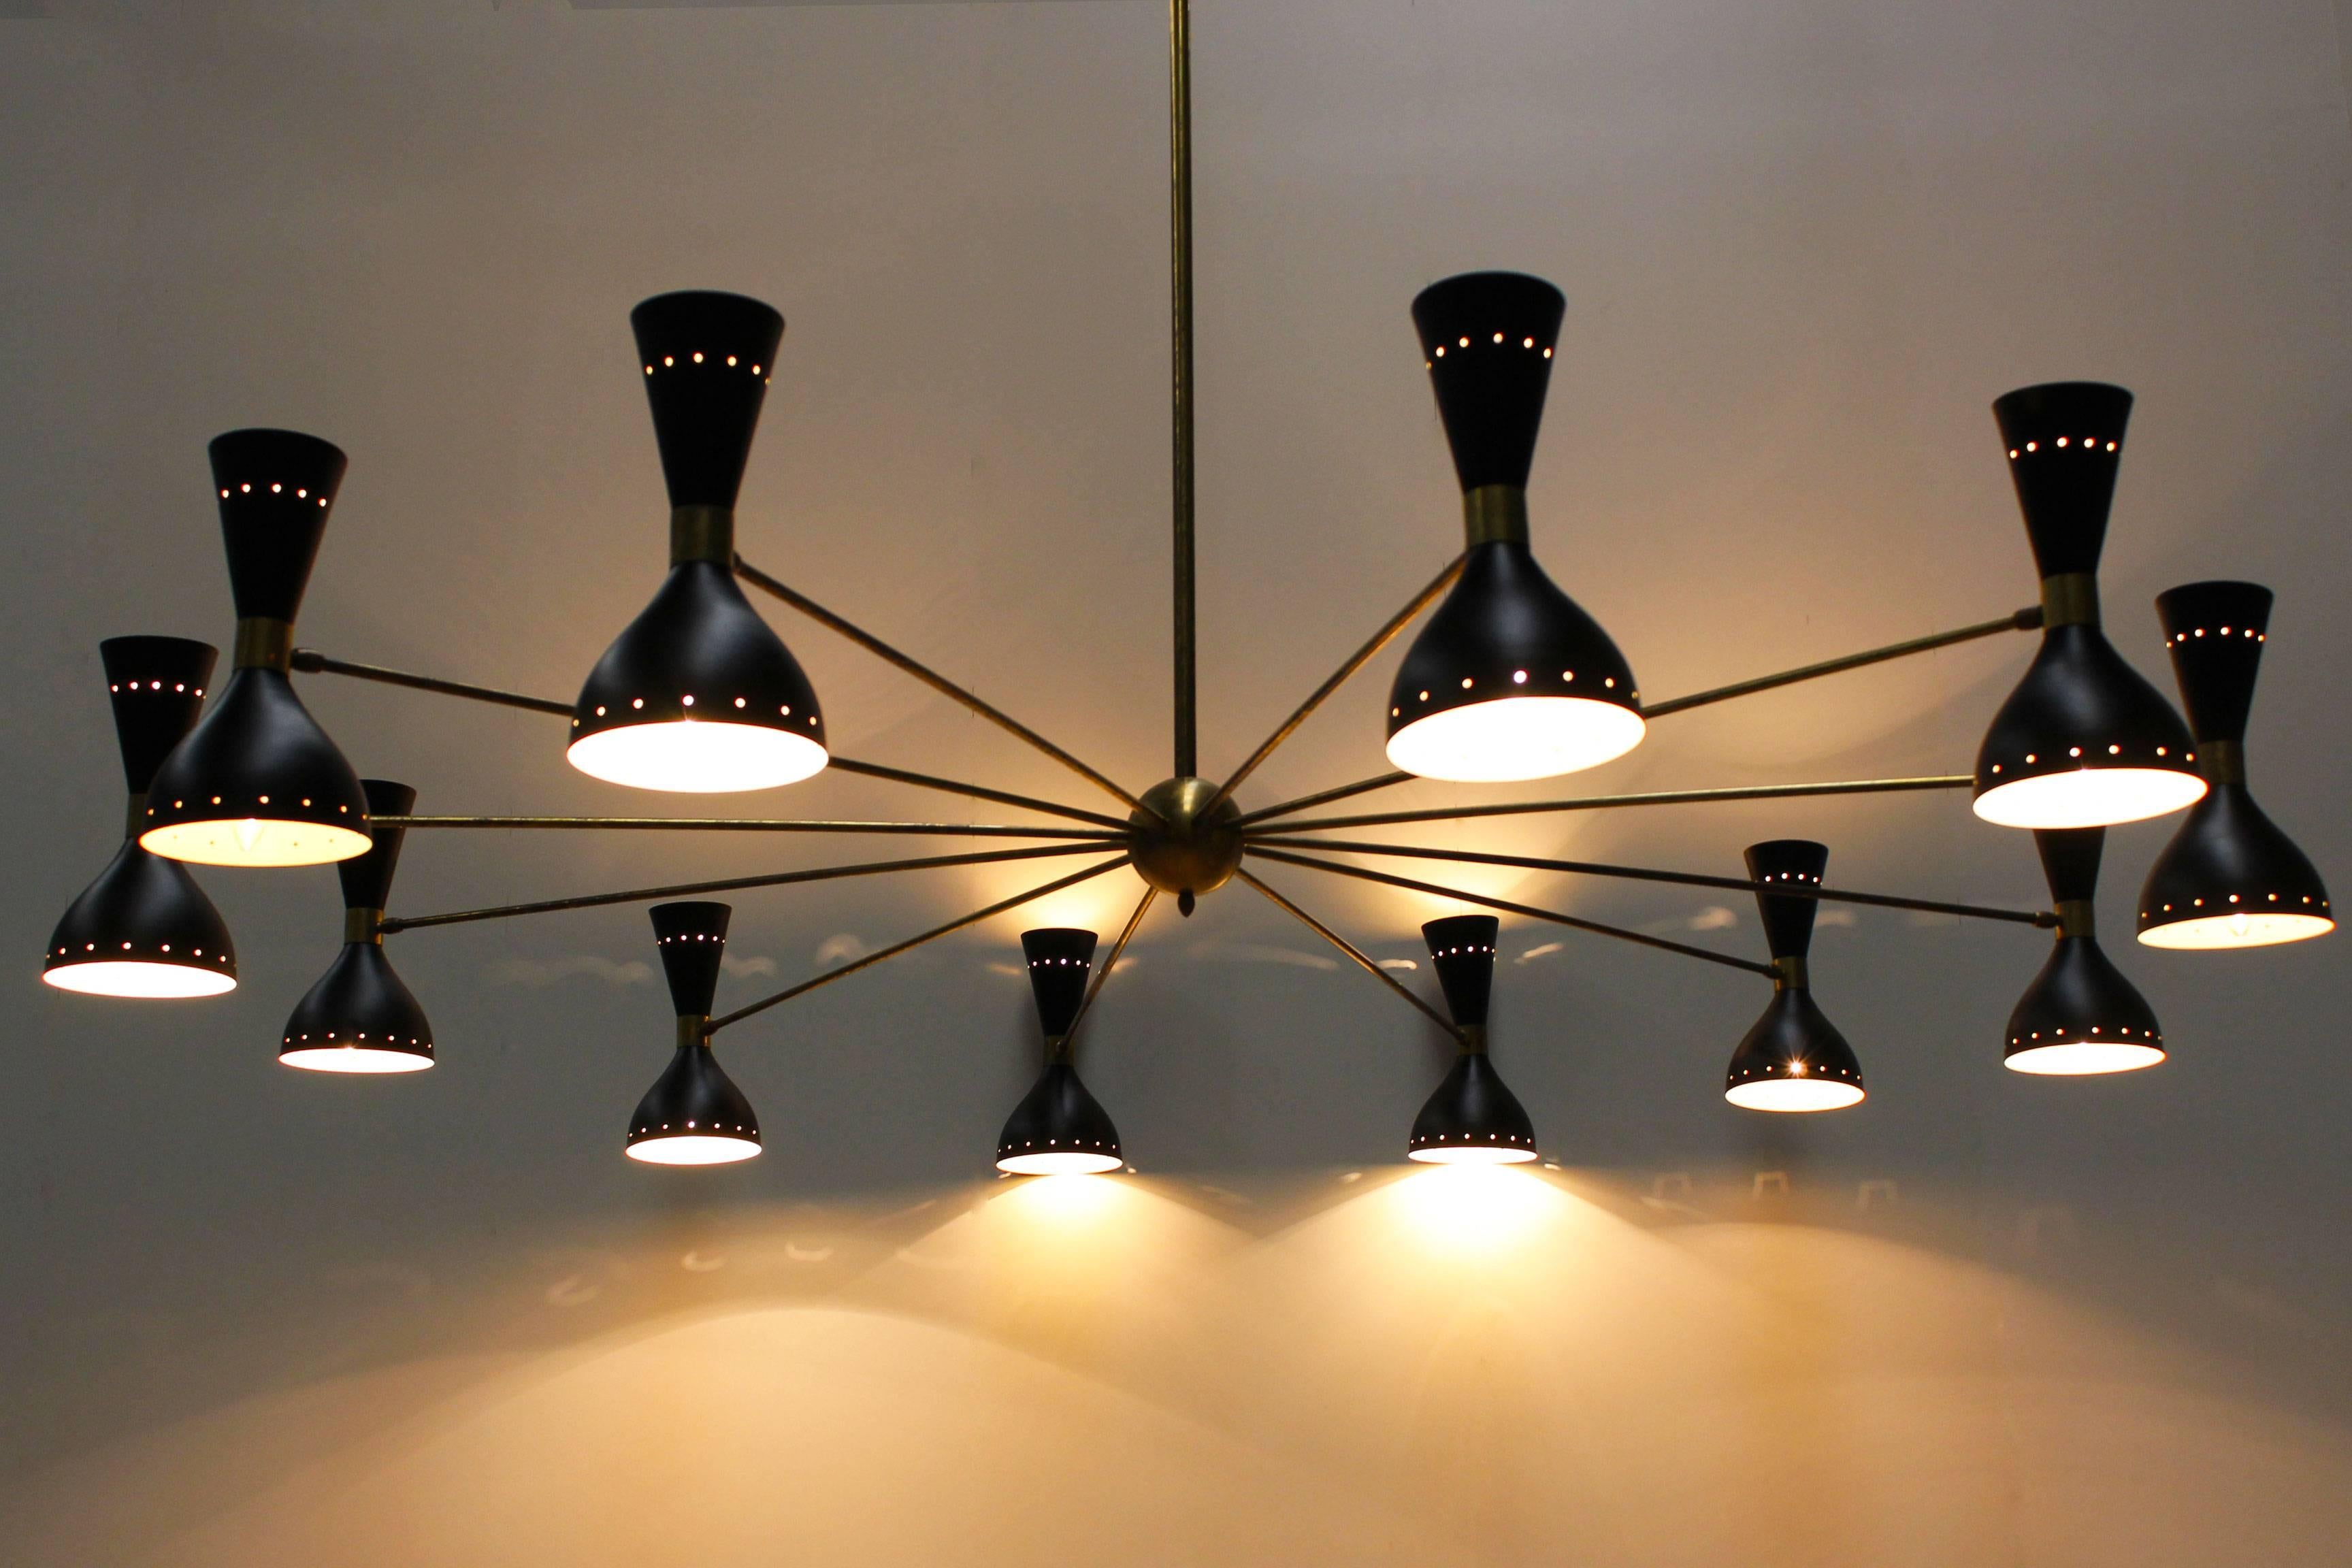 Massive Italian chandelier midcentury design 1950s Stilnovo with a diameter of 190 cm. The chandelier has 24 sockets, 12 pointing upwards and 12 downwards. De chandelier has a brass frame and black metal shades. Its minimalistic shape make it great